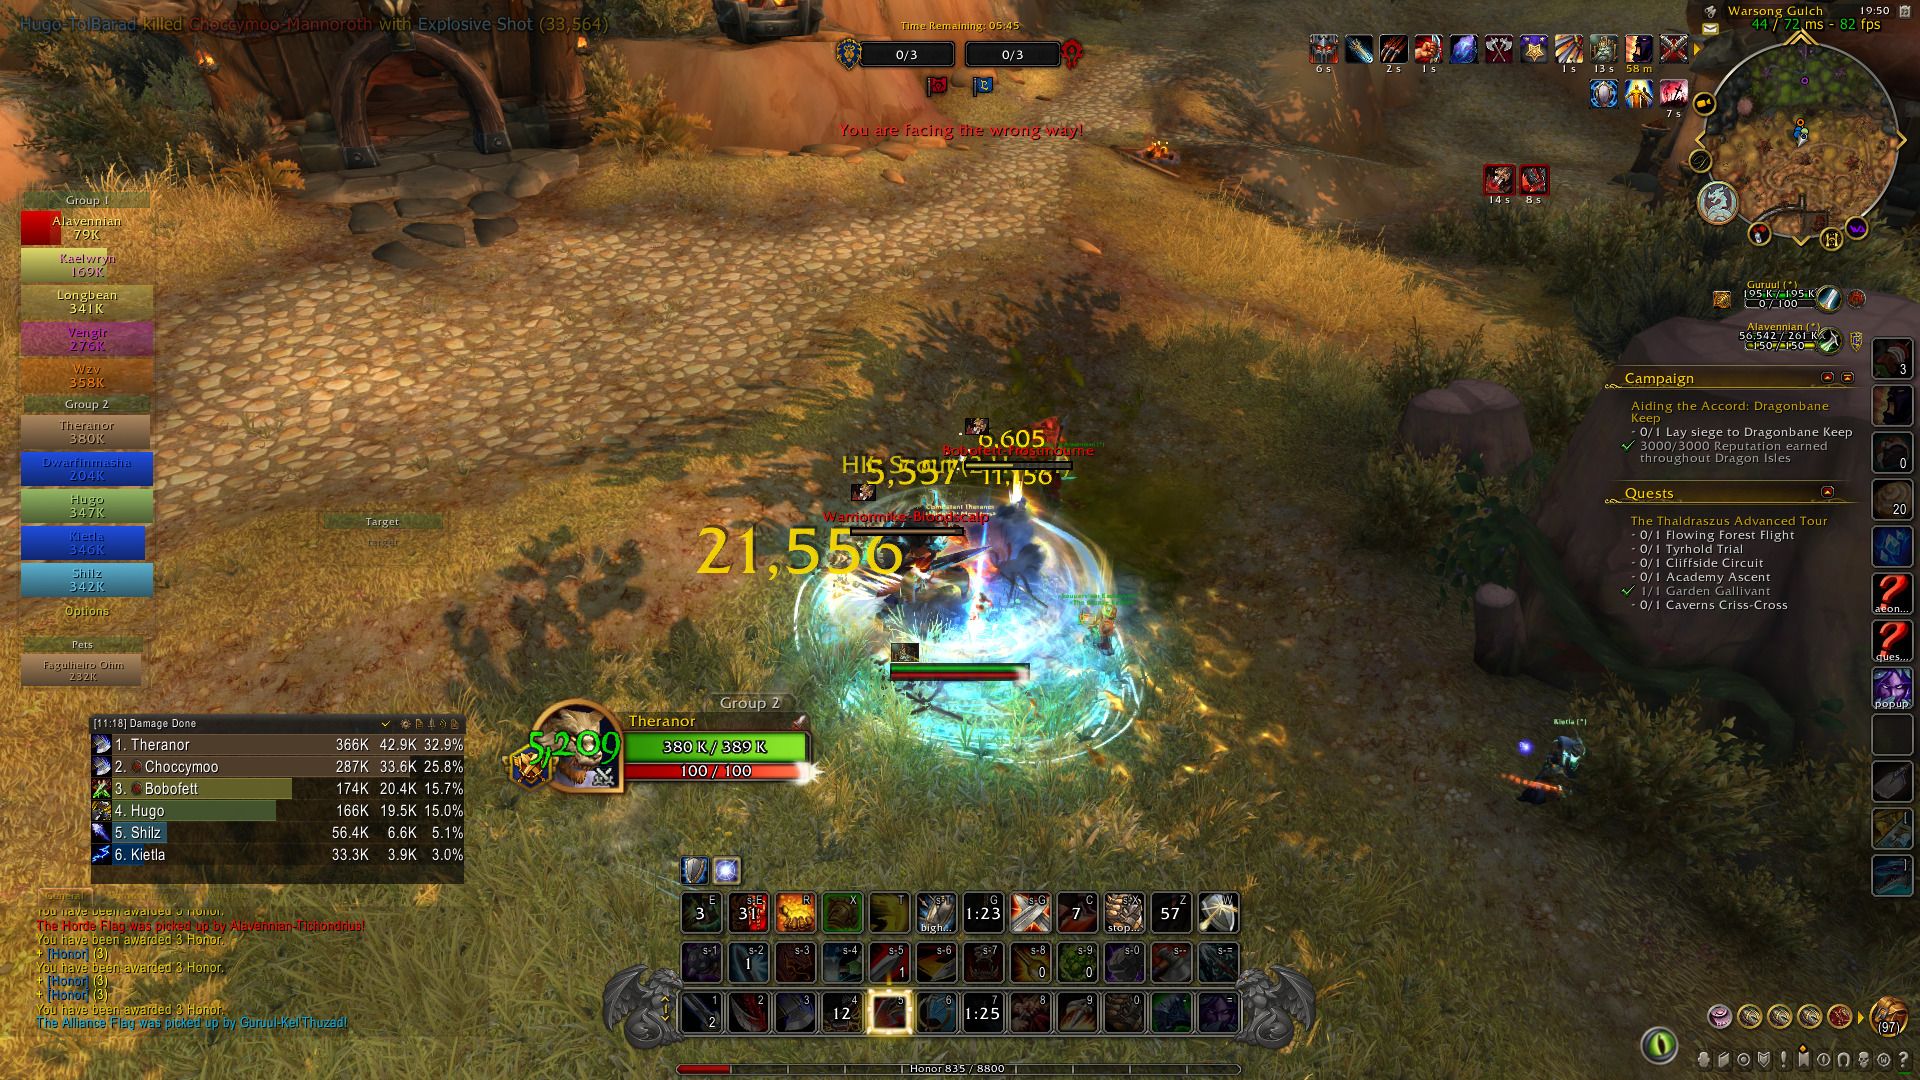 Warrior attacking two horde players in Warsong Gulch with multiple addons on display